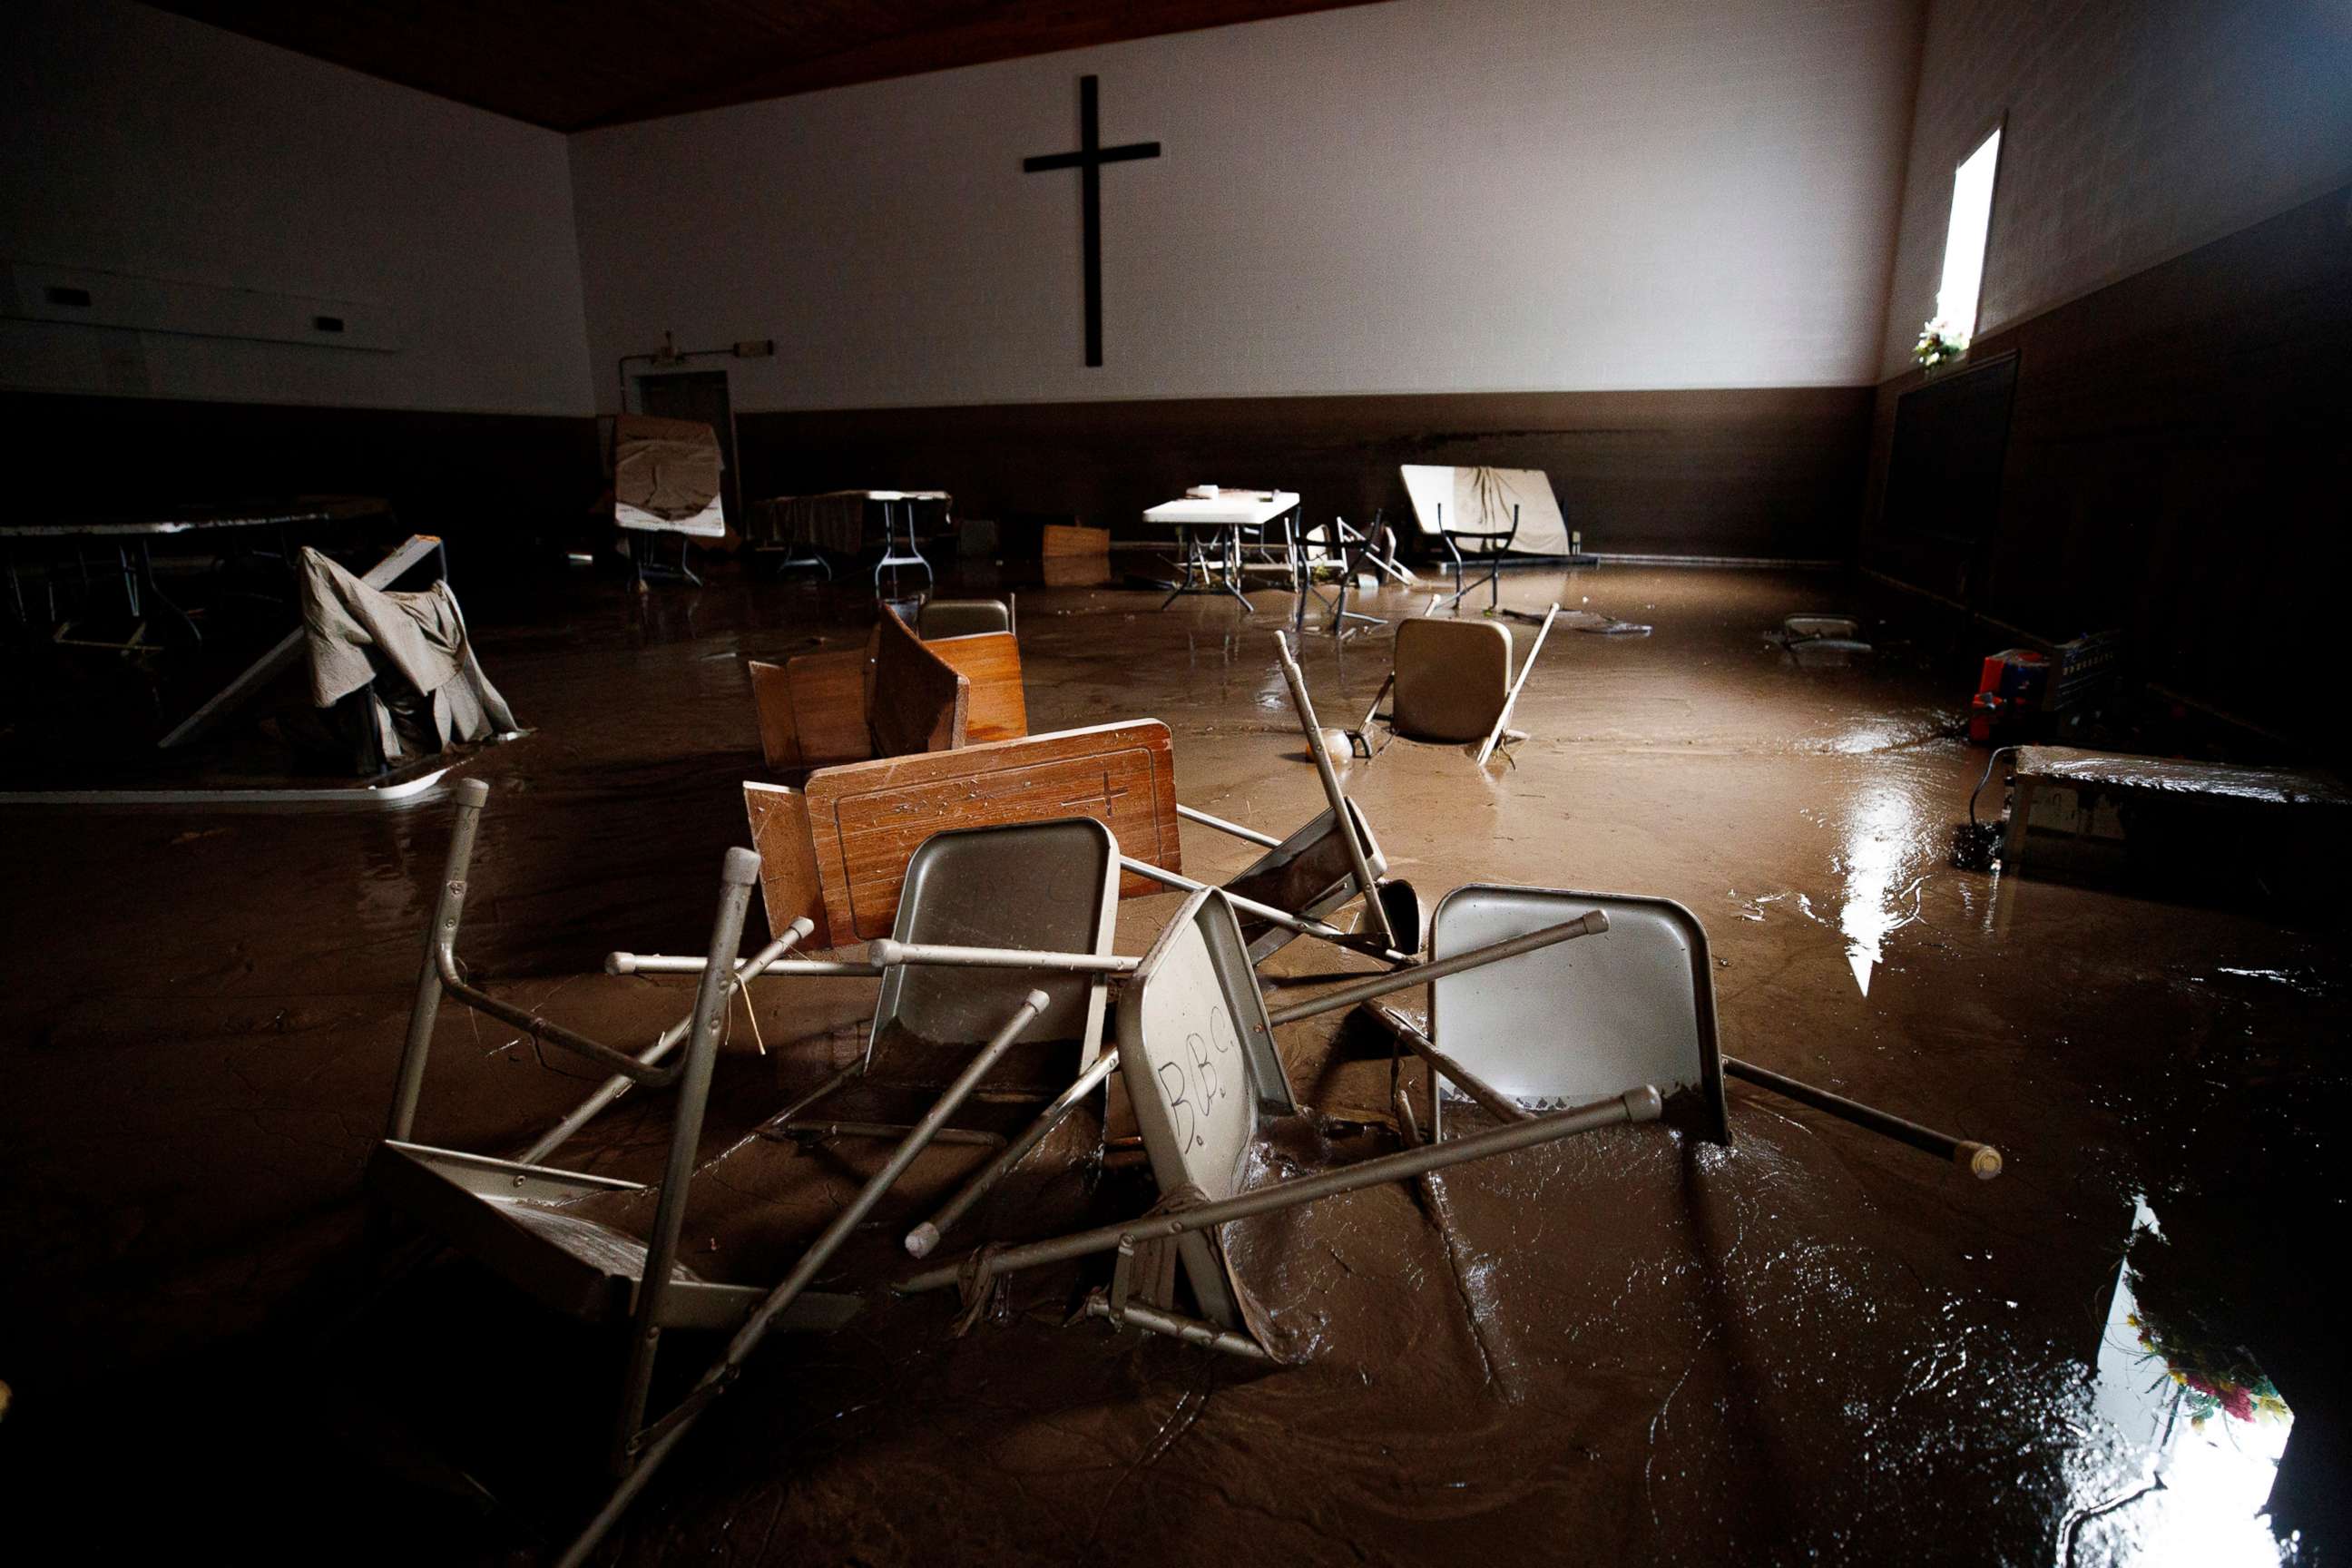 PHOTO: Chairs and pews lie in mud at Baptist Bible Church, July 14, 2022 in Whitewood, Va., following a flash flood.